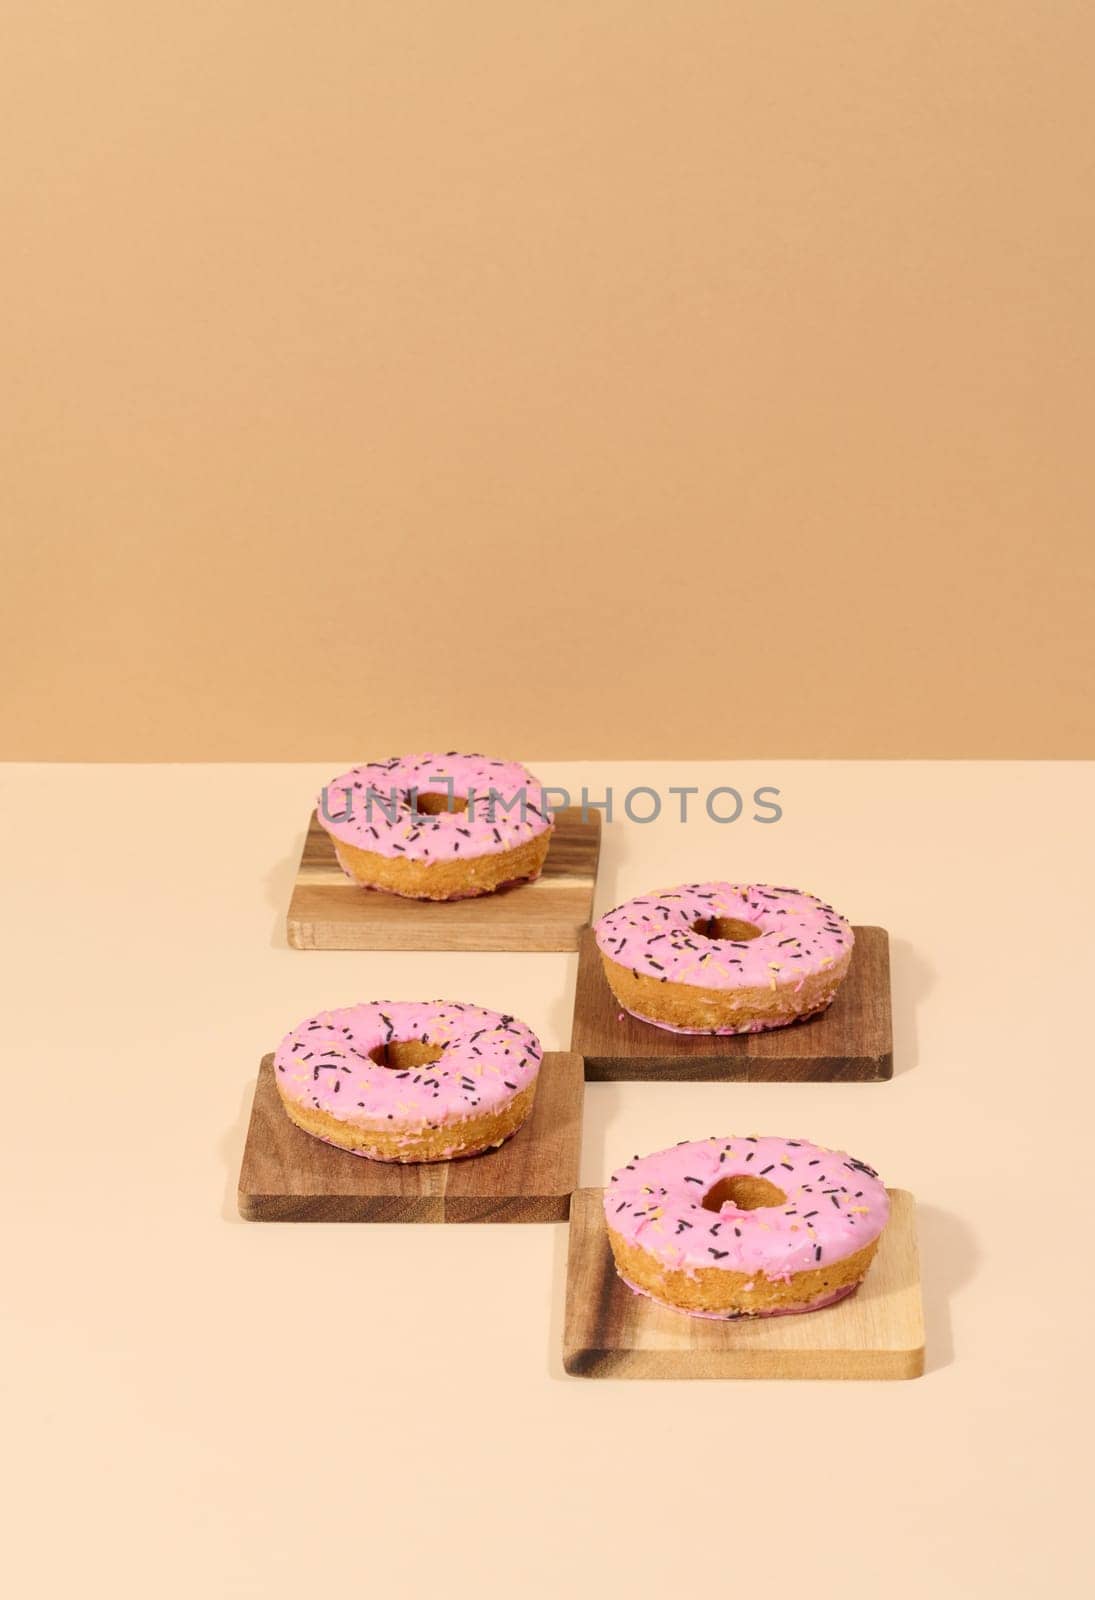 Donut covered with pink glaze and sprinkled with colorful sprinkles, brown background